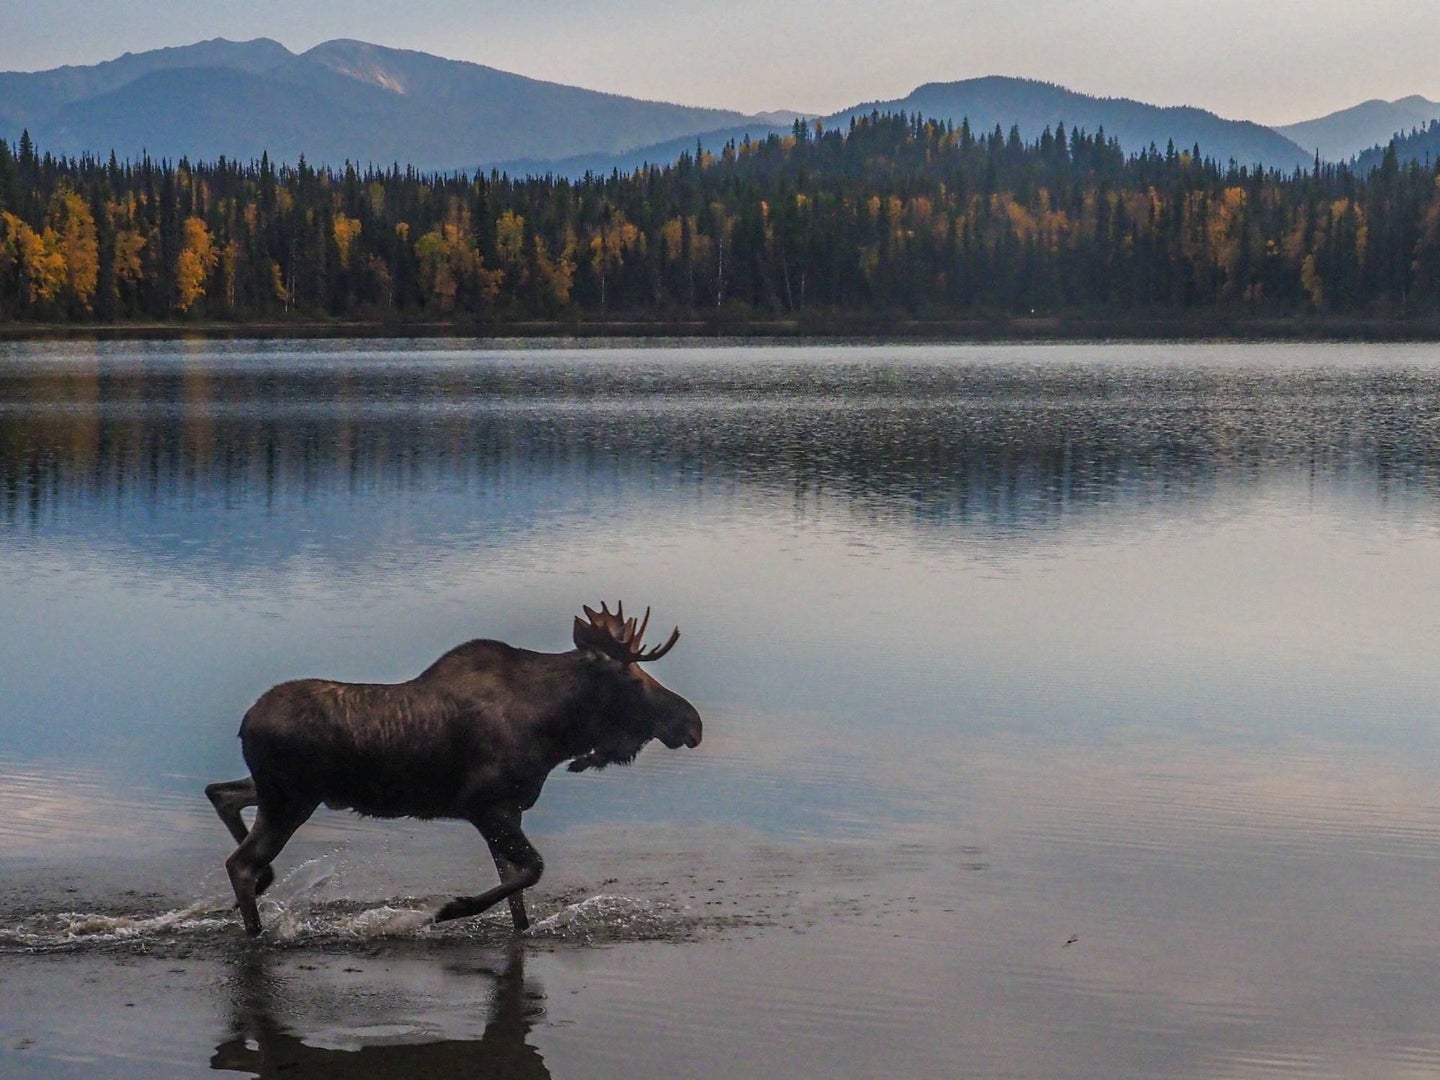 moose in a lake with mountains in the background